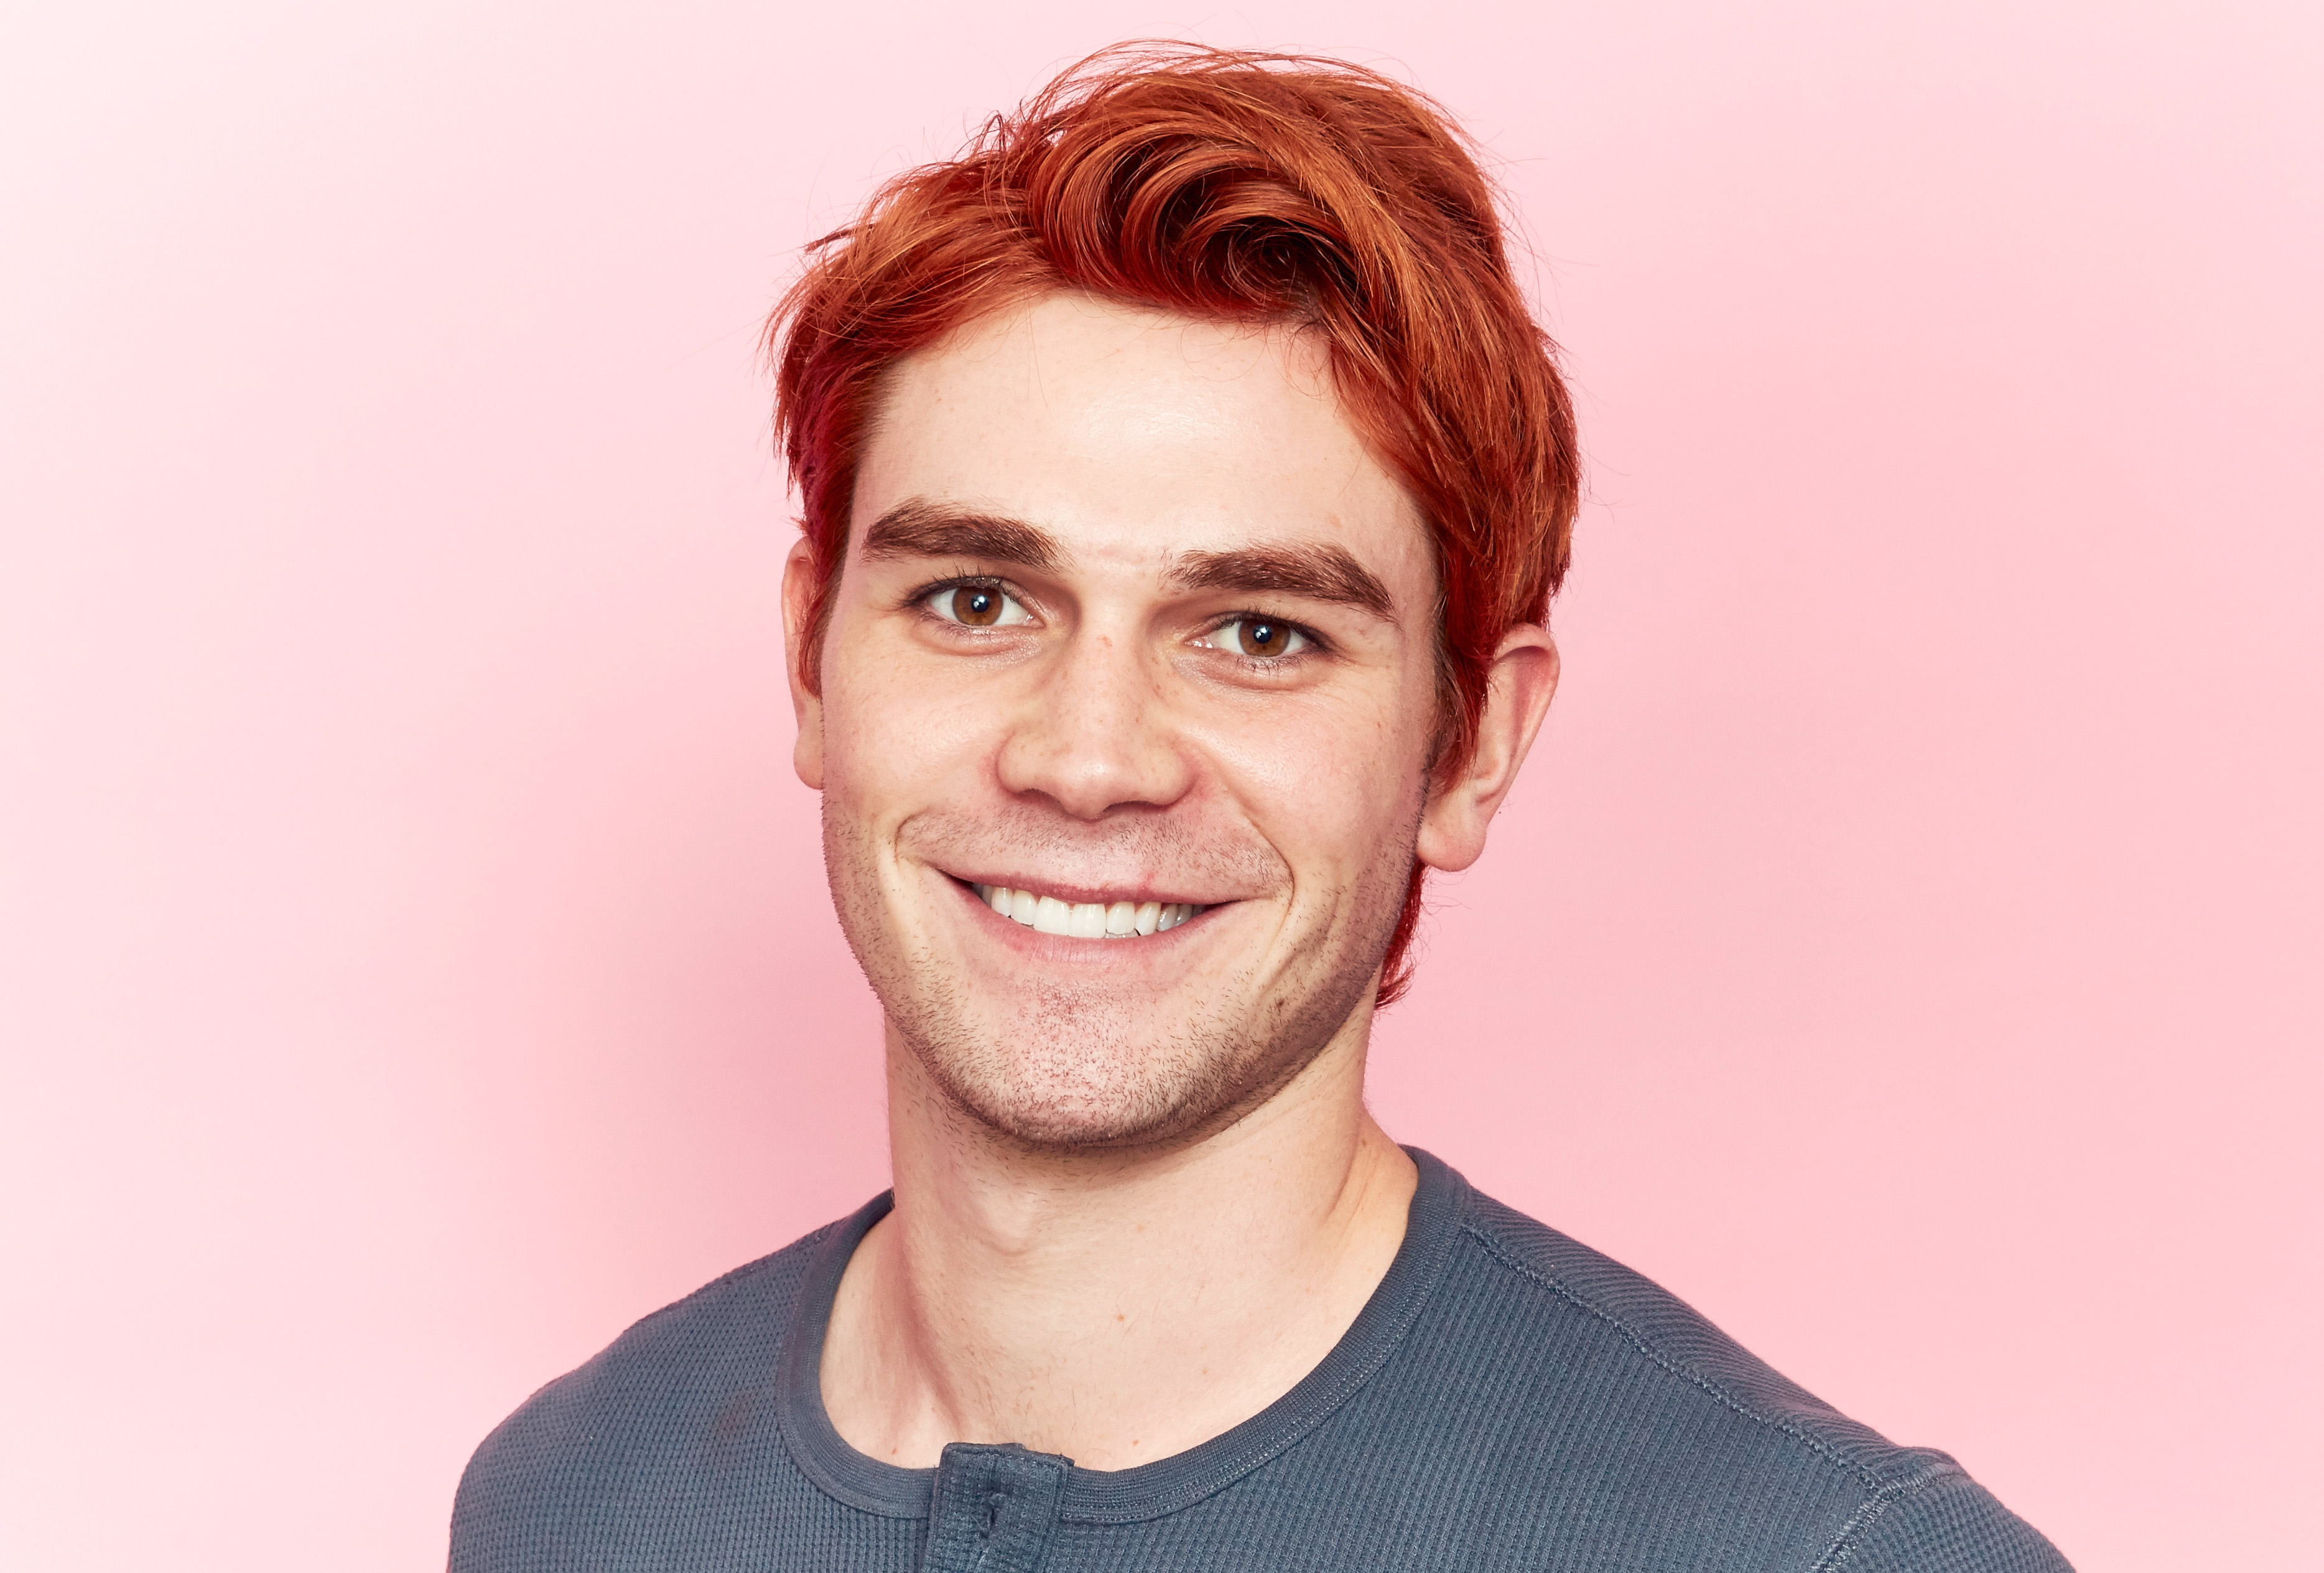 Love his new photo shoots | Archie andrews riverdale 